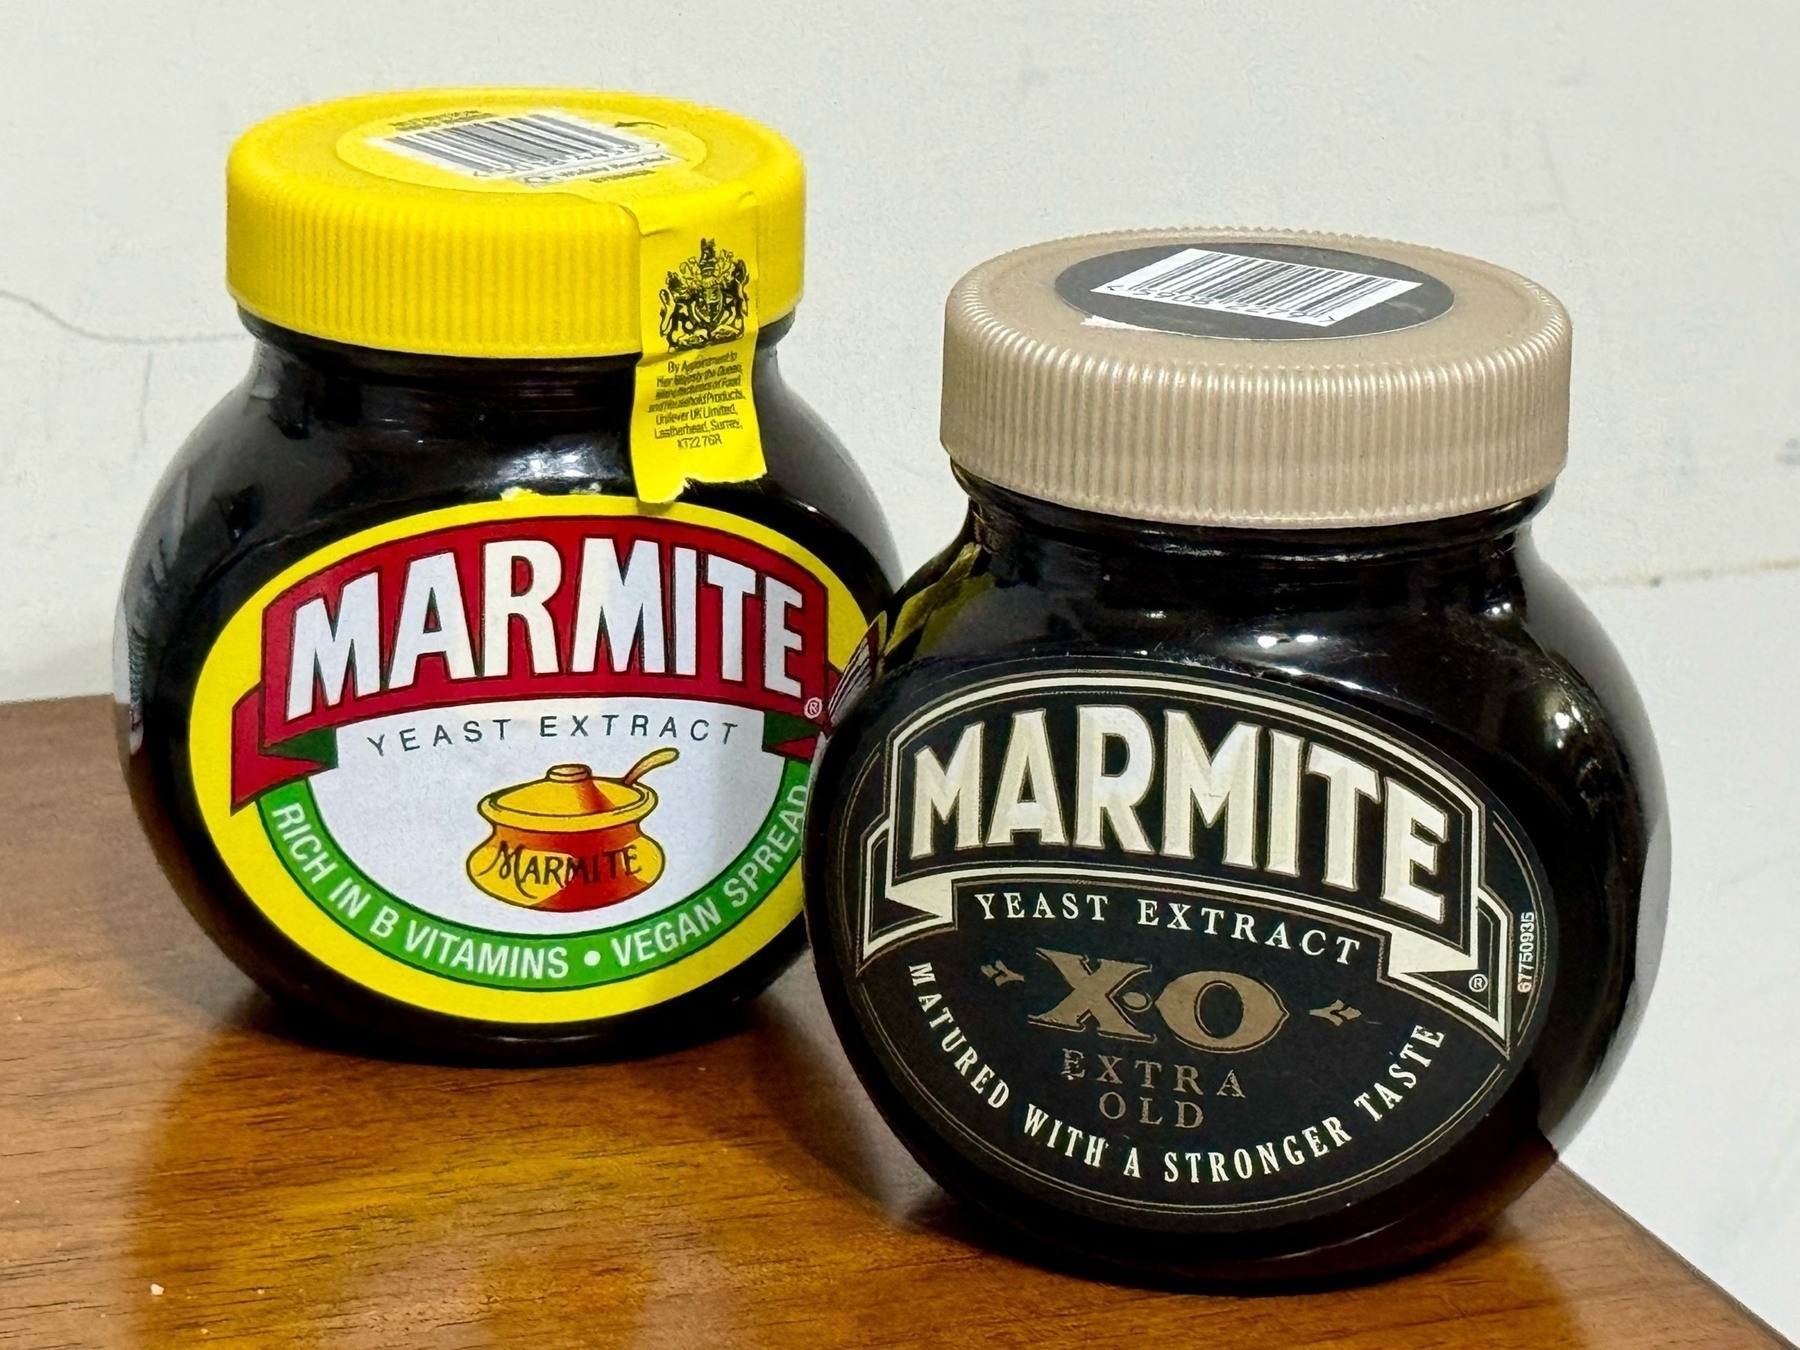 Two jars of Marmite; one normal with a yellow lid, and the XO (extra old/mature) beside it